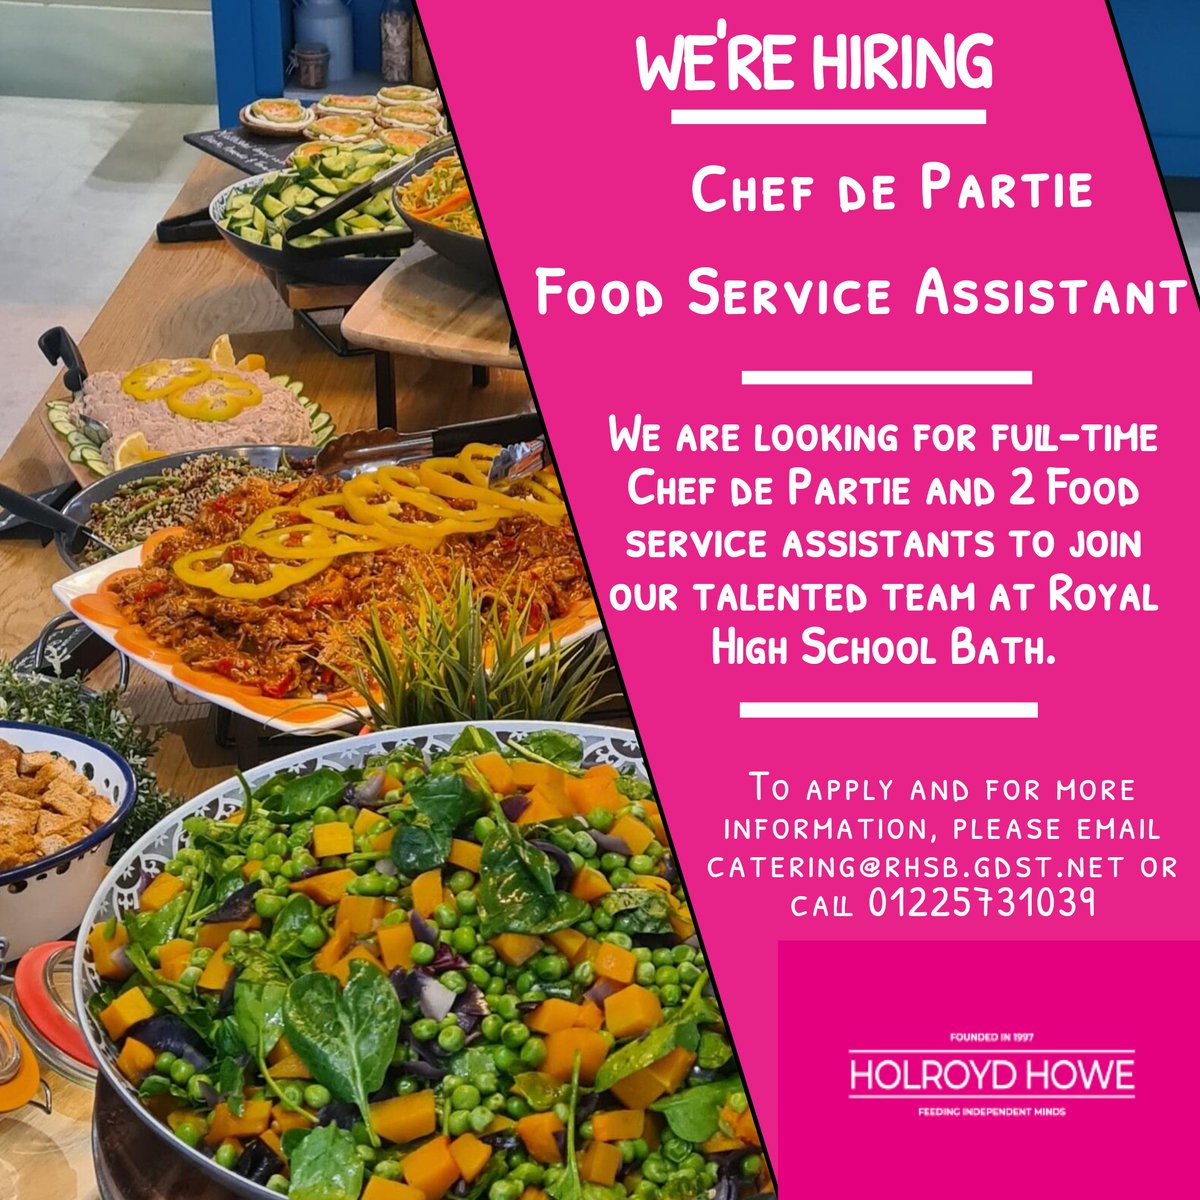 Interested in joining our @HolroydHowe team? We are currently #hiring for full-time Chef de Partie and 2 Food service assistants to join our talented and hardworking team @RoyalHighBath @melrahaman @gregrebourg @CharlieW0109 @DanielCollier84 @DamianBlake4 #JoinOurTeam